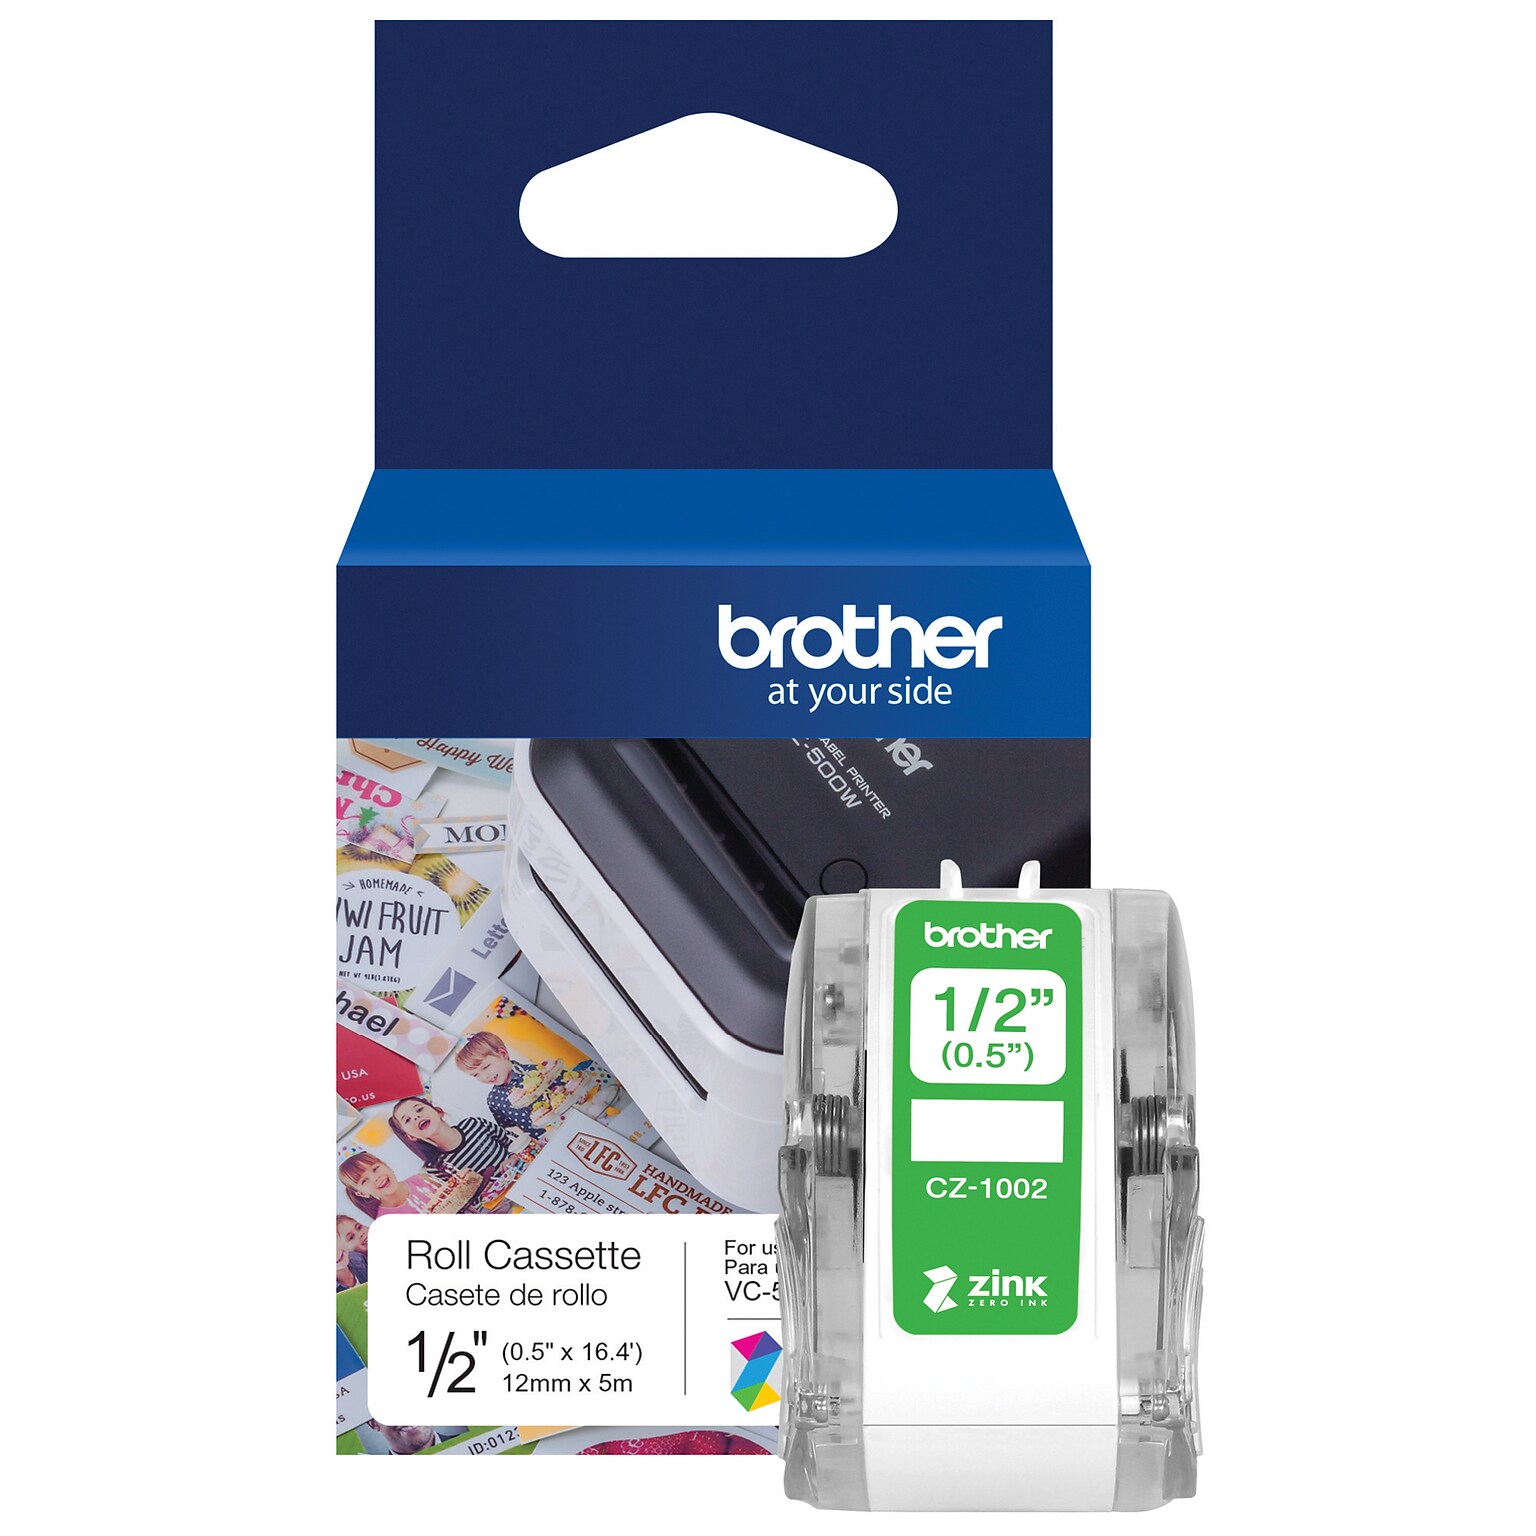 Brother CZ-1002 Continuous Paper Label Roll with ZINK® Zero Ink technology, 1/2 x 16-4/10, Multicolored (C1002)